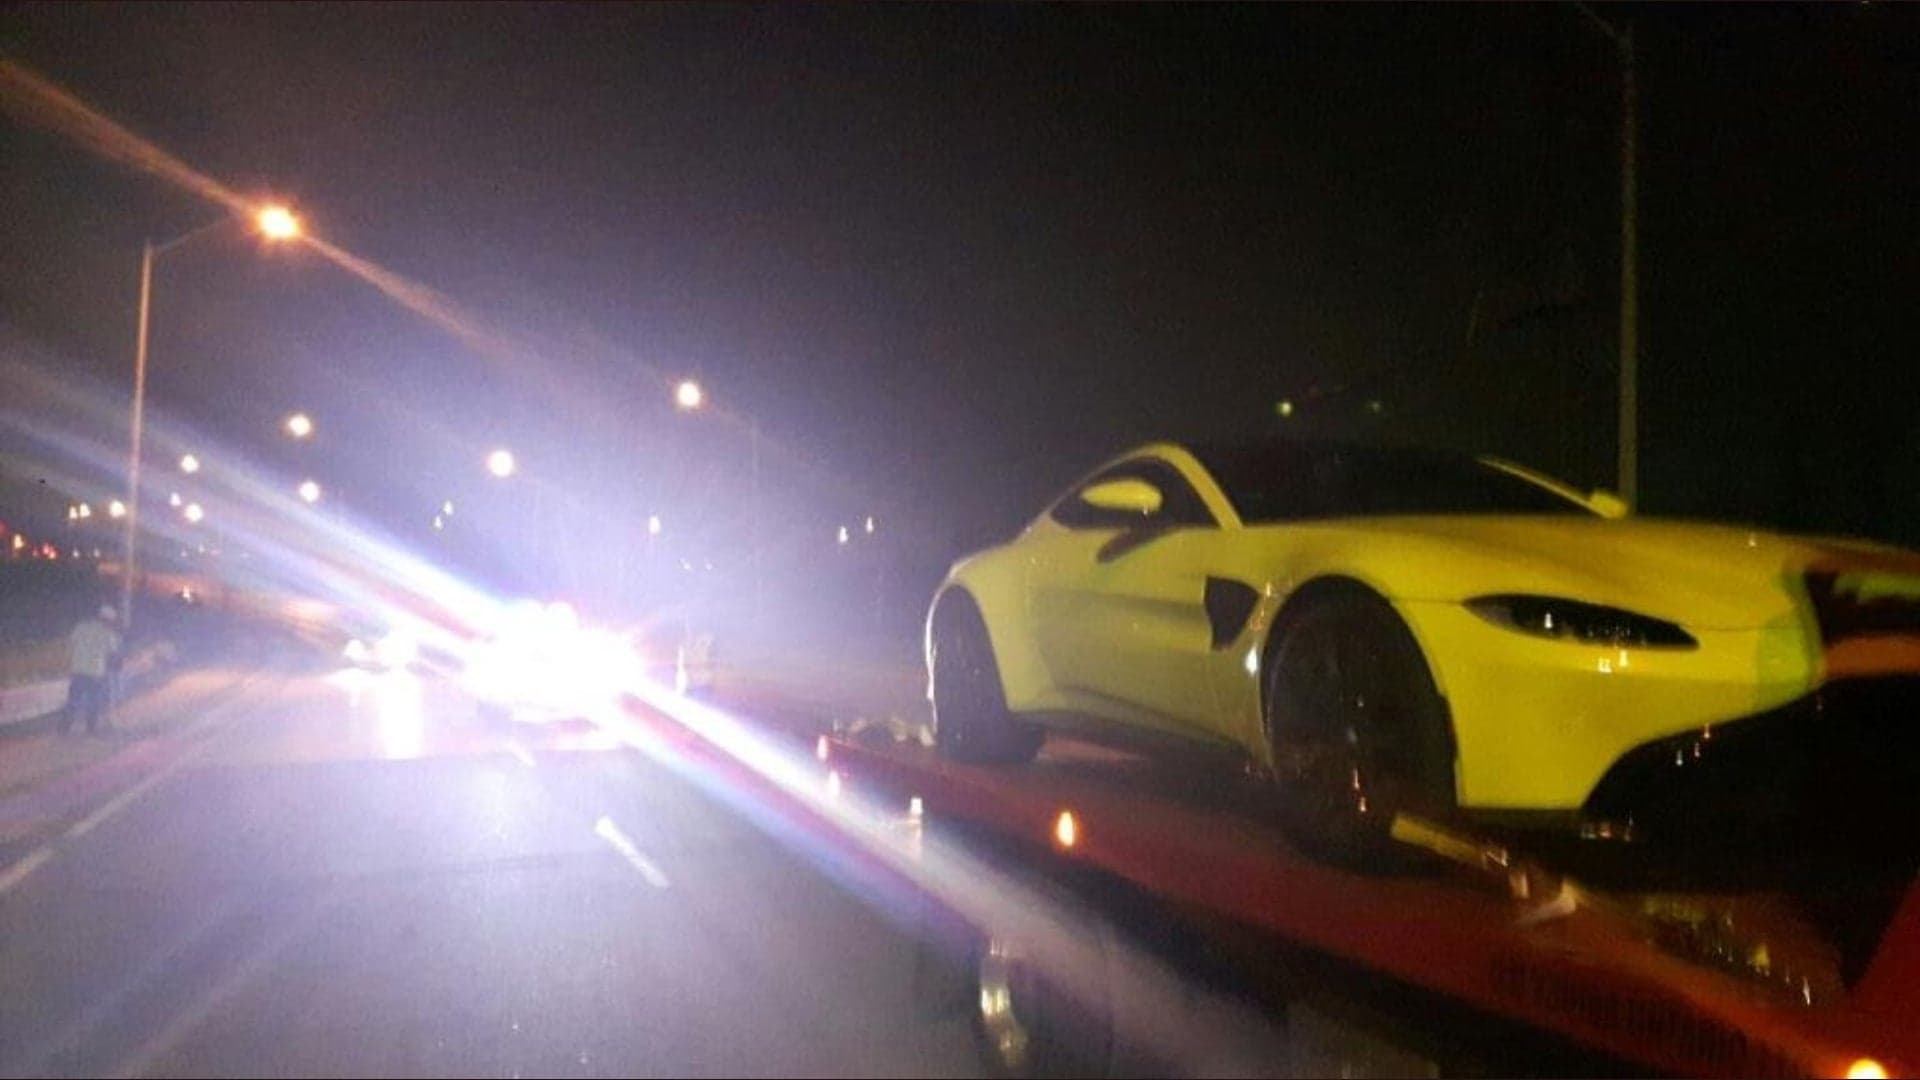 Aston Martin Vantage Seized After Doing Almost 100 MPH in School Zone